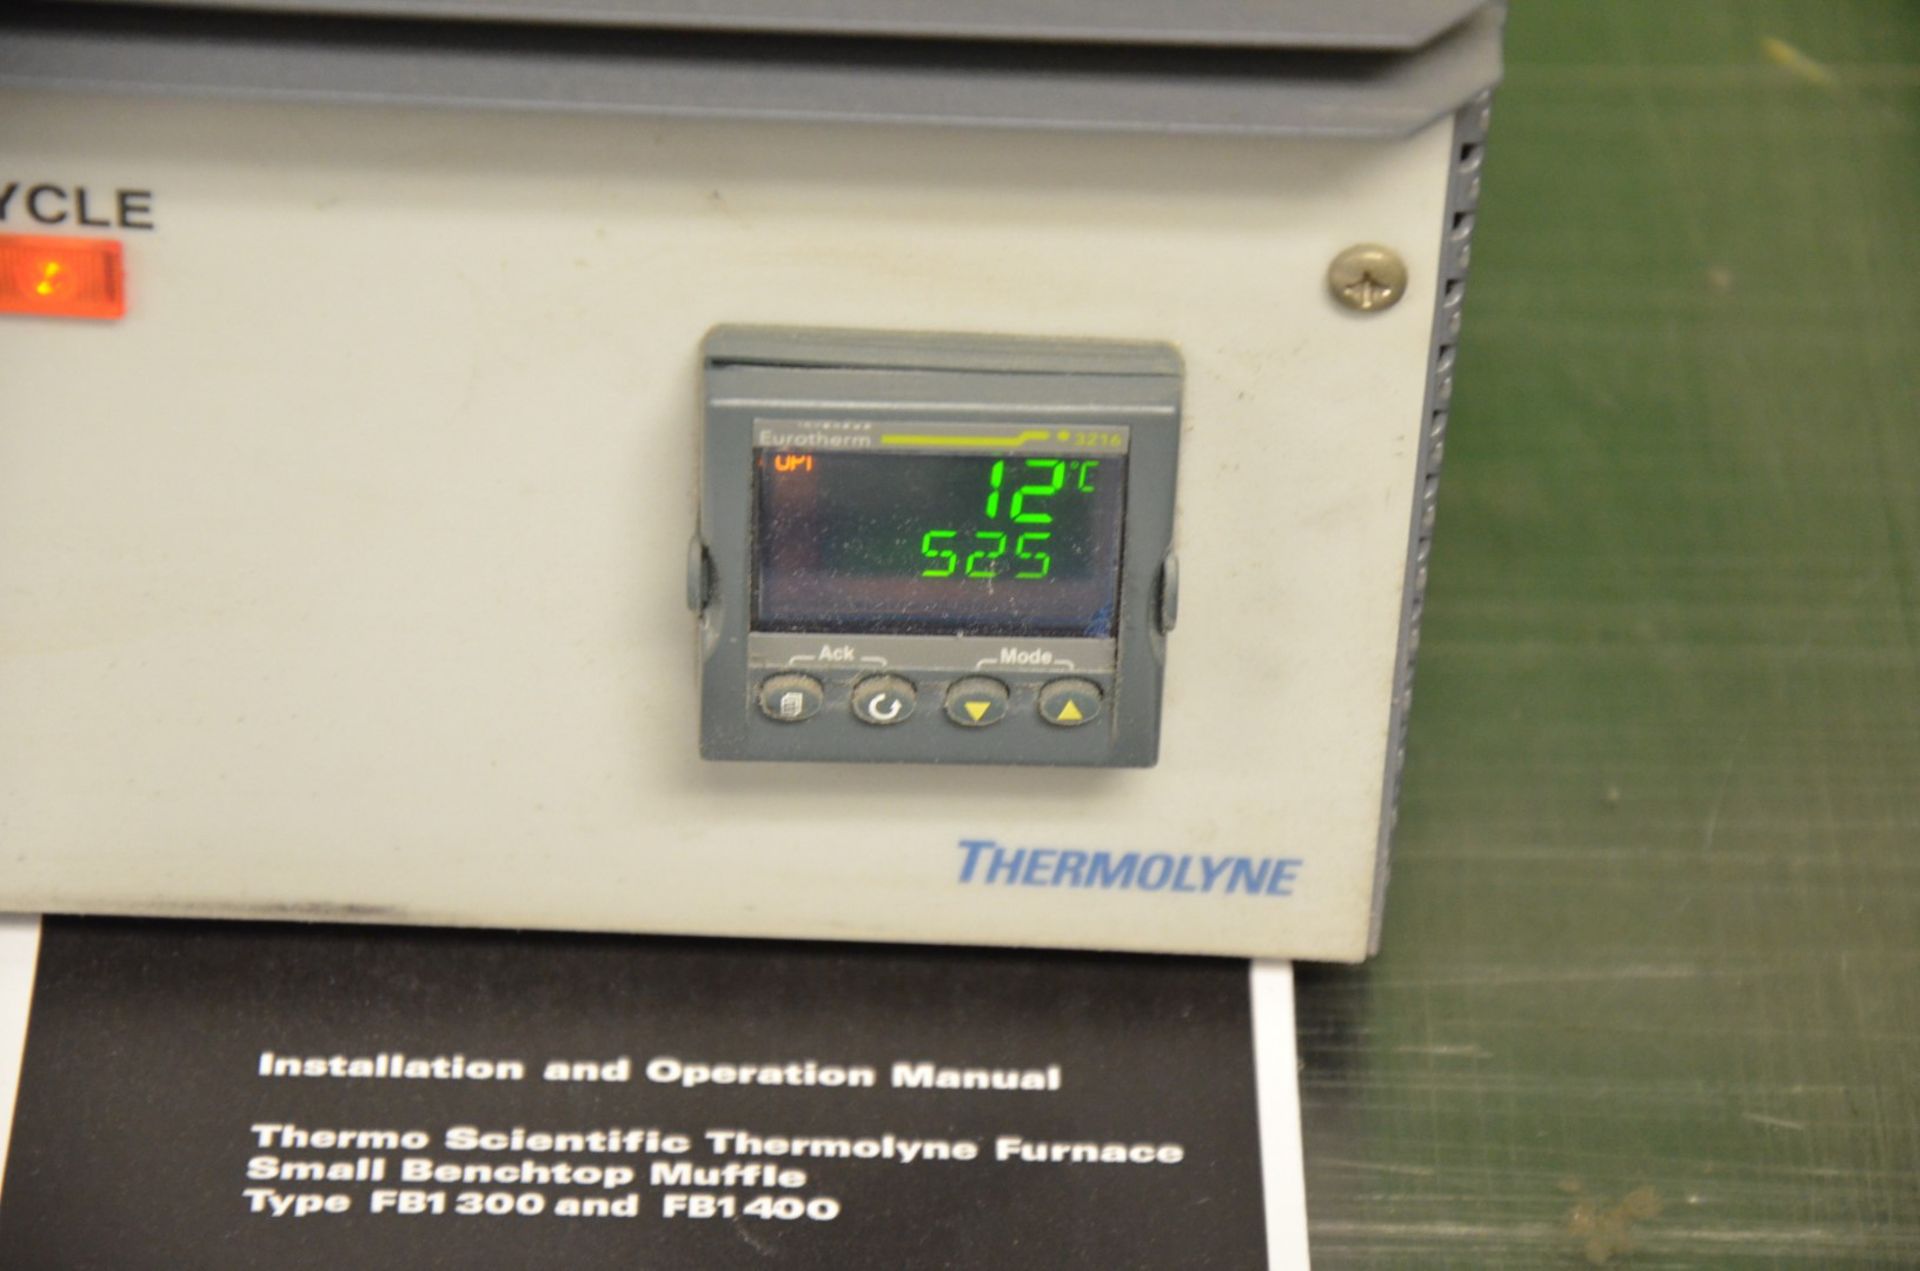 THERMO SCIENTIFIC (2013) THERMOLINE FB1415M BENCH TOP LAB FURNACE WITH DIGITAL MICROPROCESSOR - Image 3 of 7